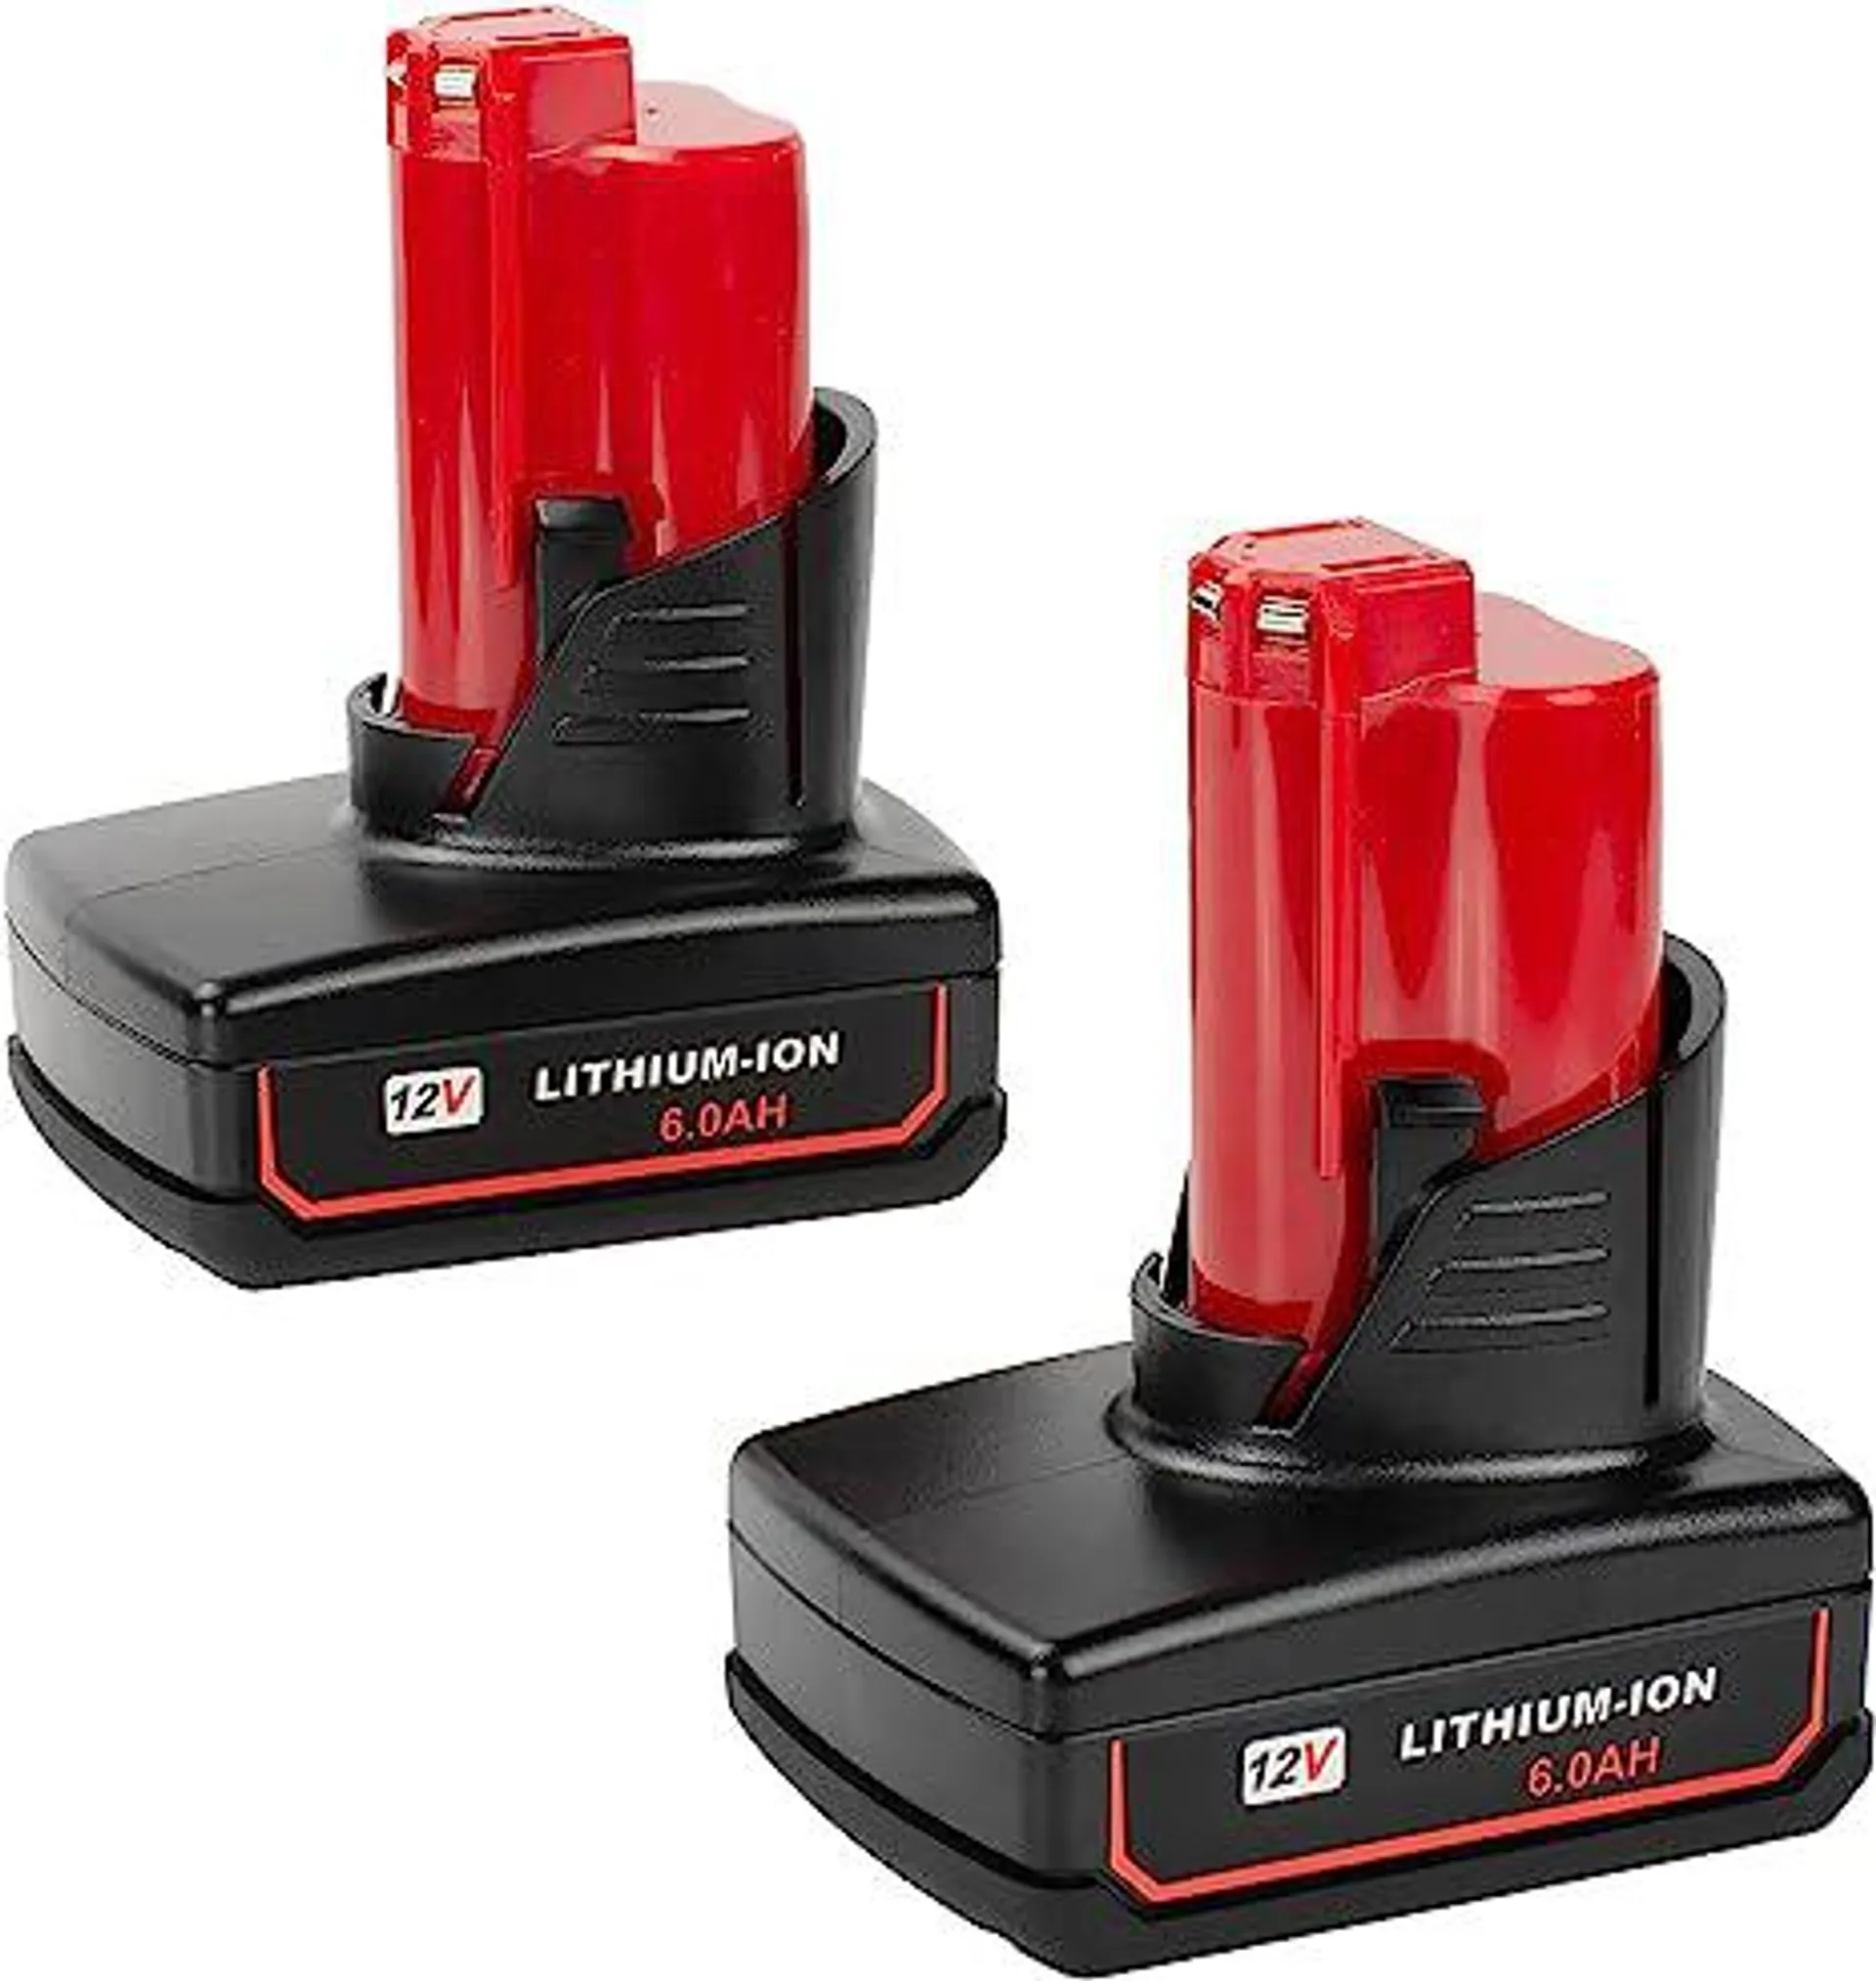 DEWQKI 2 Pack 6000mAh 12V Lithium Ion Replacement Battery Compatible with Milwaukee M12 Battery 48-11-2401 48-11-2402 48-11-2411 48-11-2420 12-Volt Cordless Tools